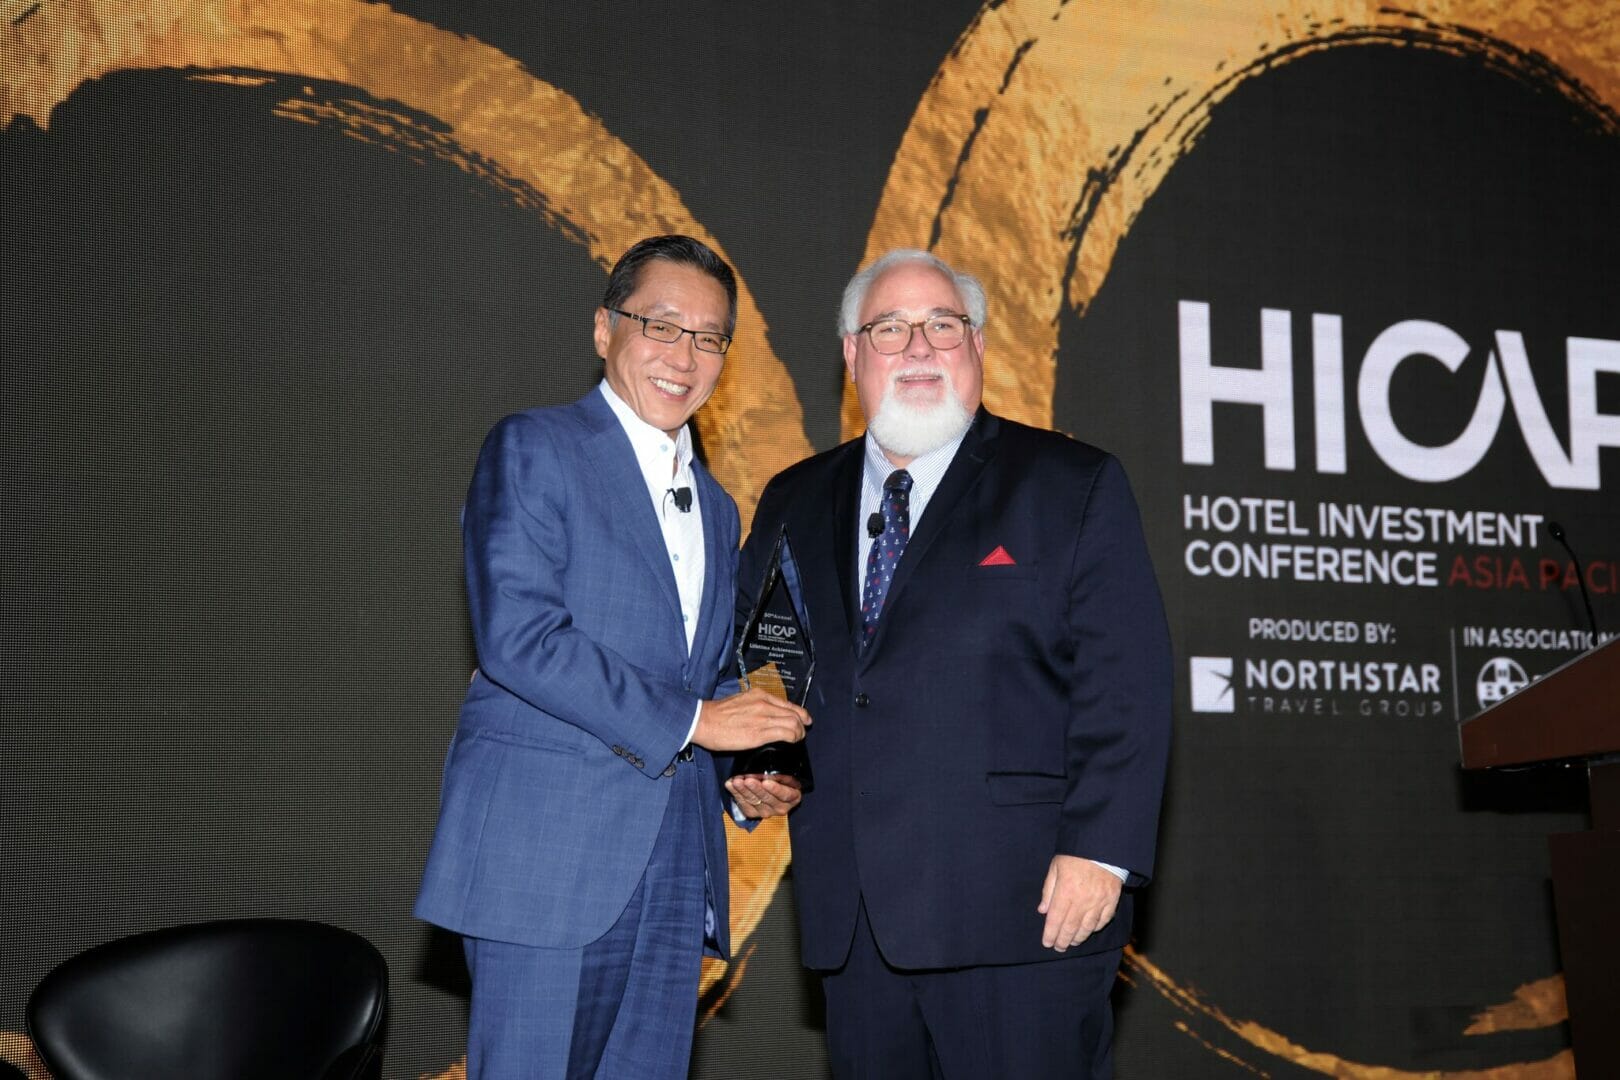 Banyan Tree Holdings Founder and Executive Chairman Mr Ho Kwon Ping Conferred Prestigious HICAP Lifetime Achievement Award @Banyan_Tree